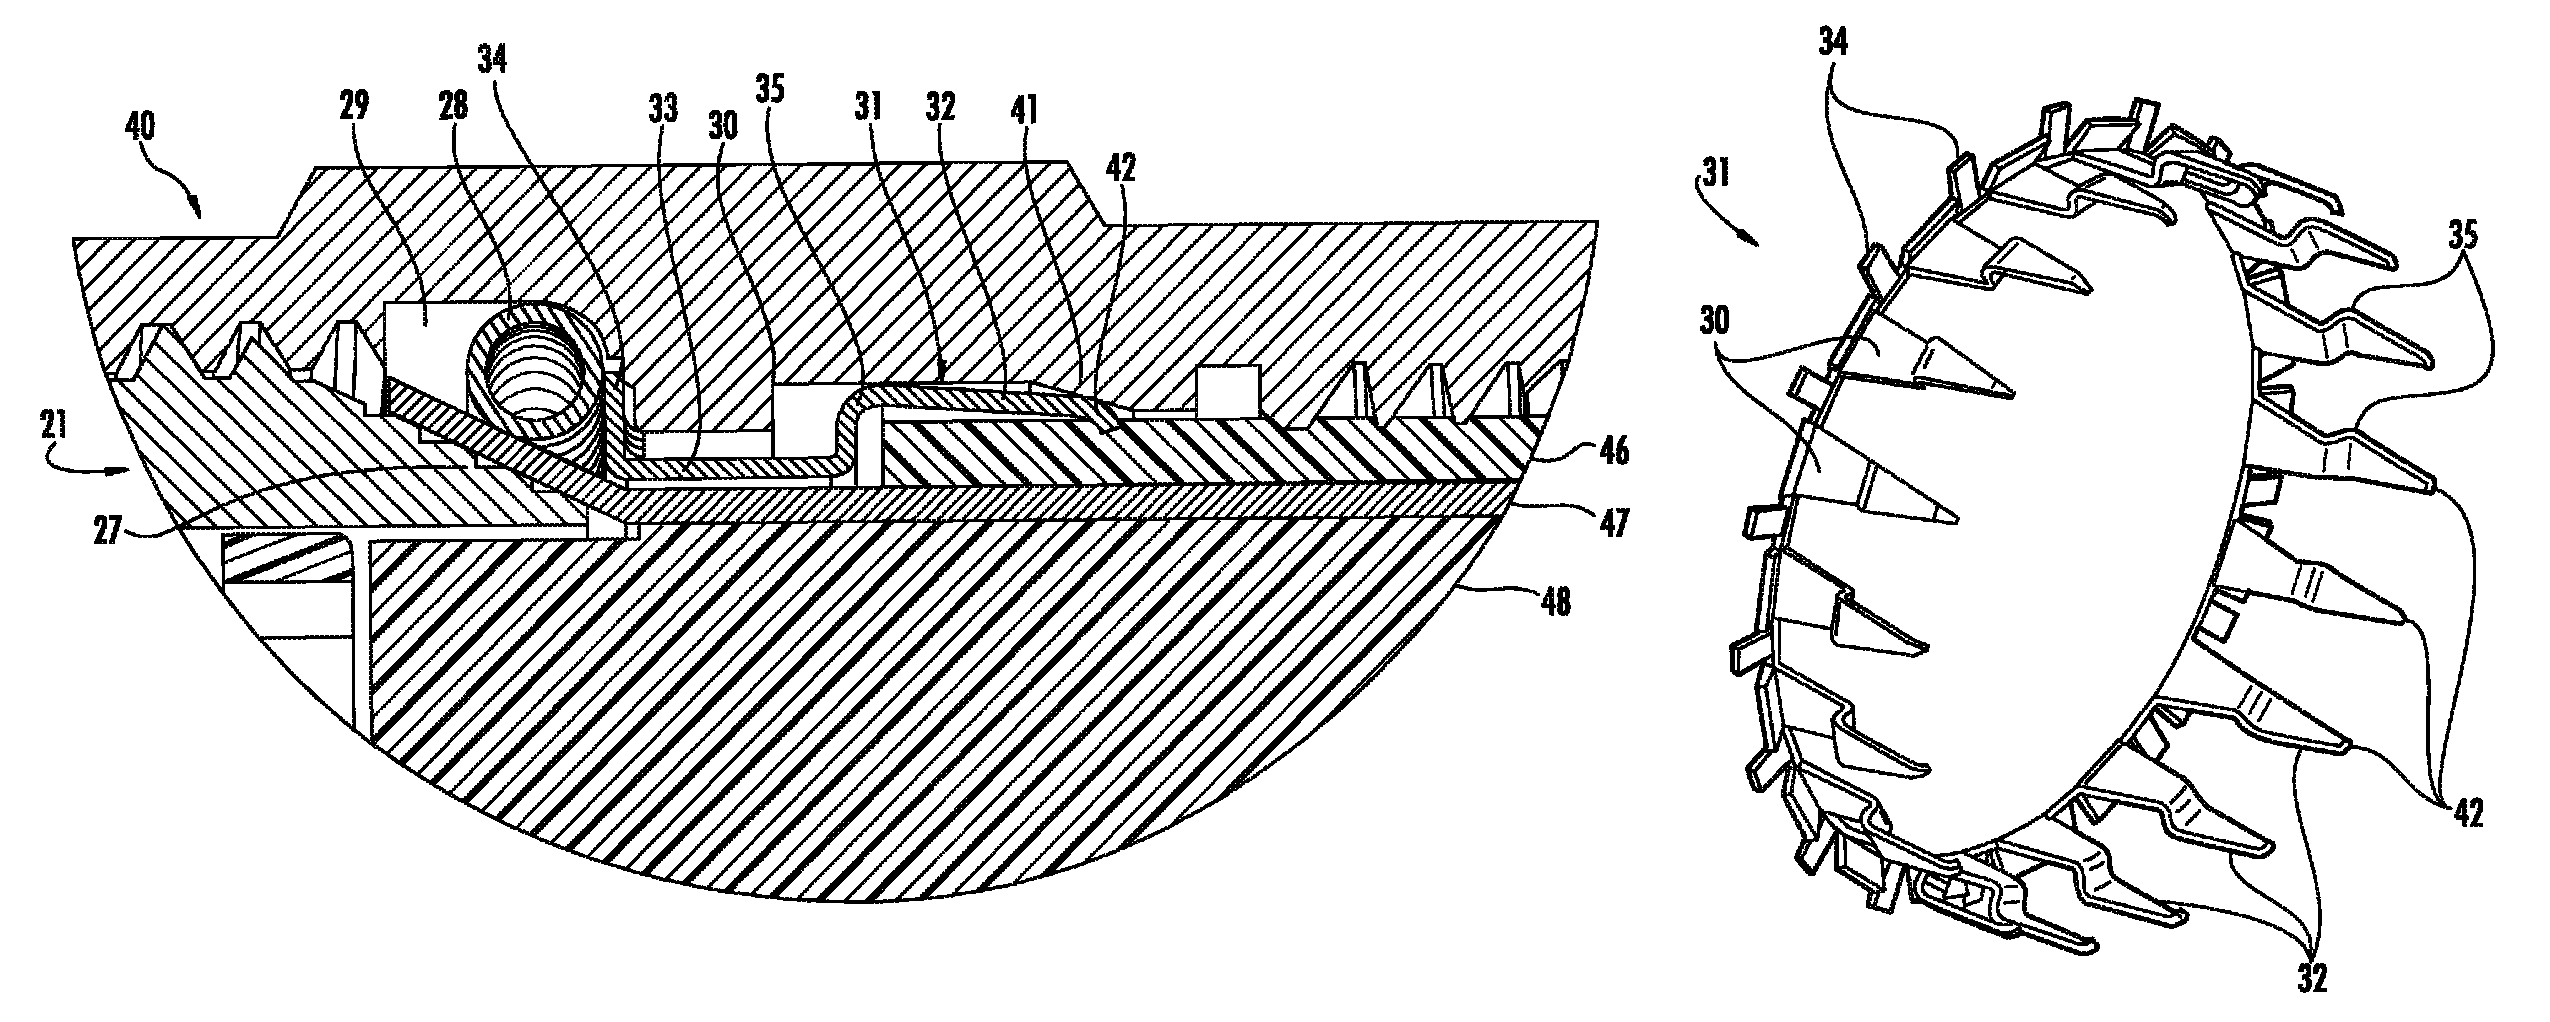 Coaxial cable connector having jacket gripping ferrule and associated methods